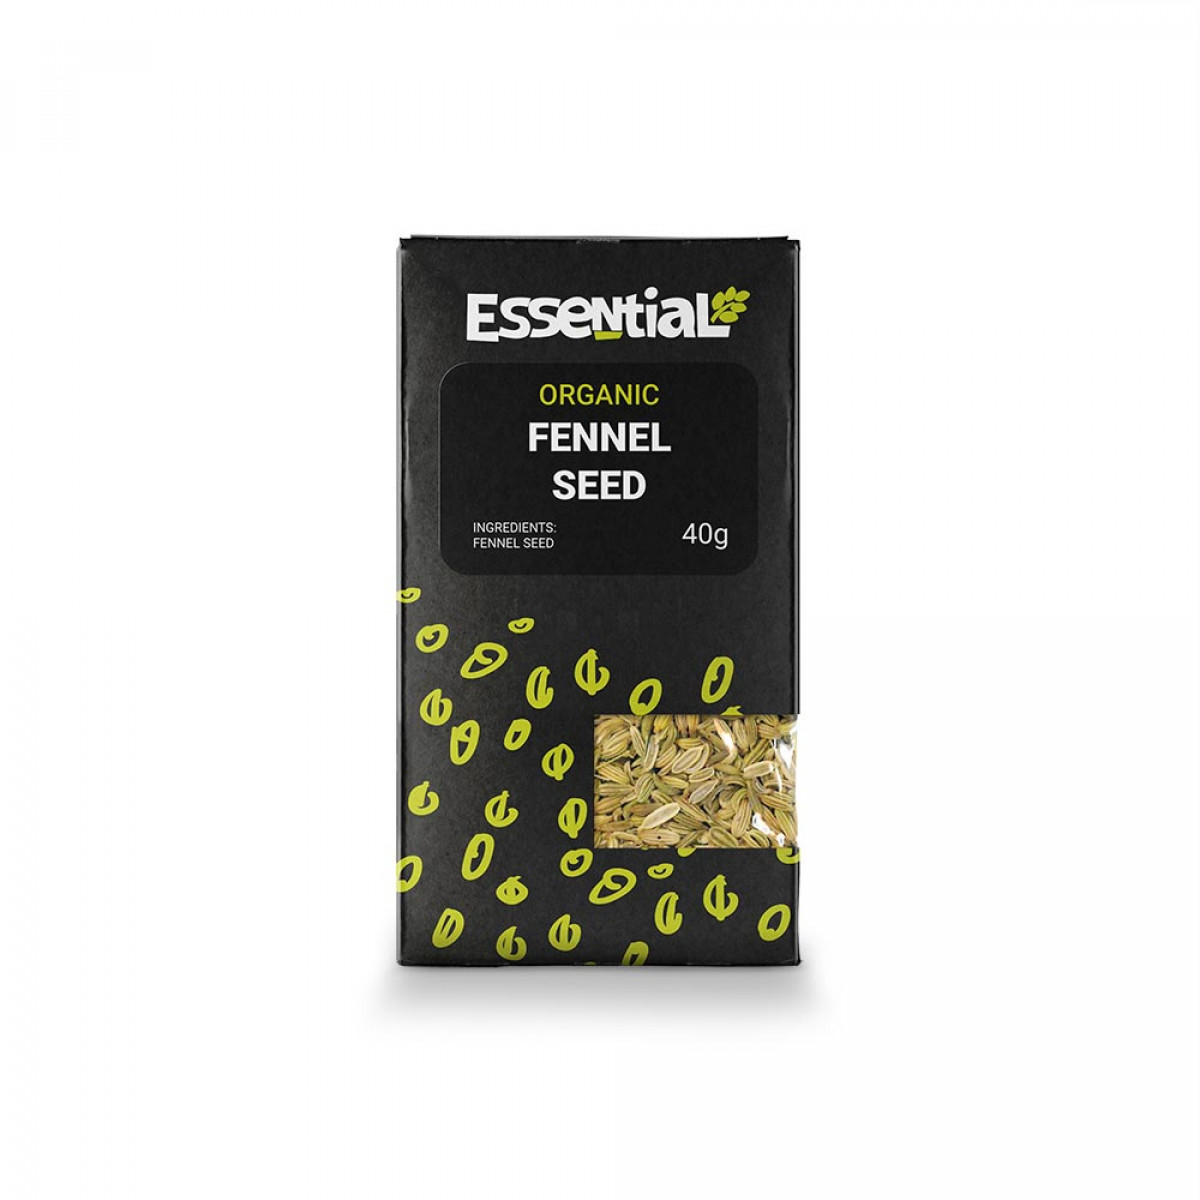 Product picture for Fennel Seed